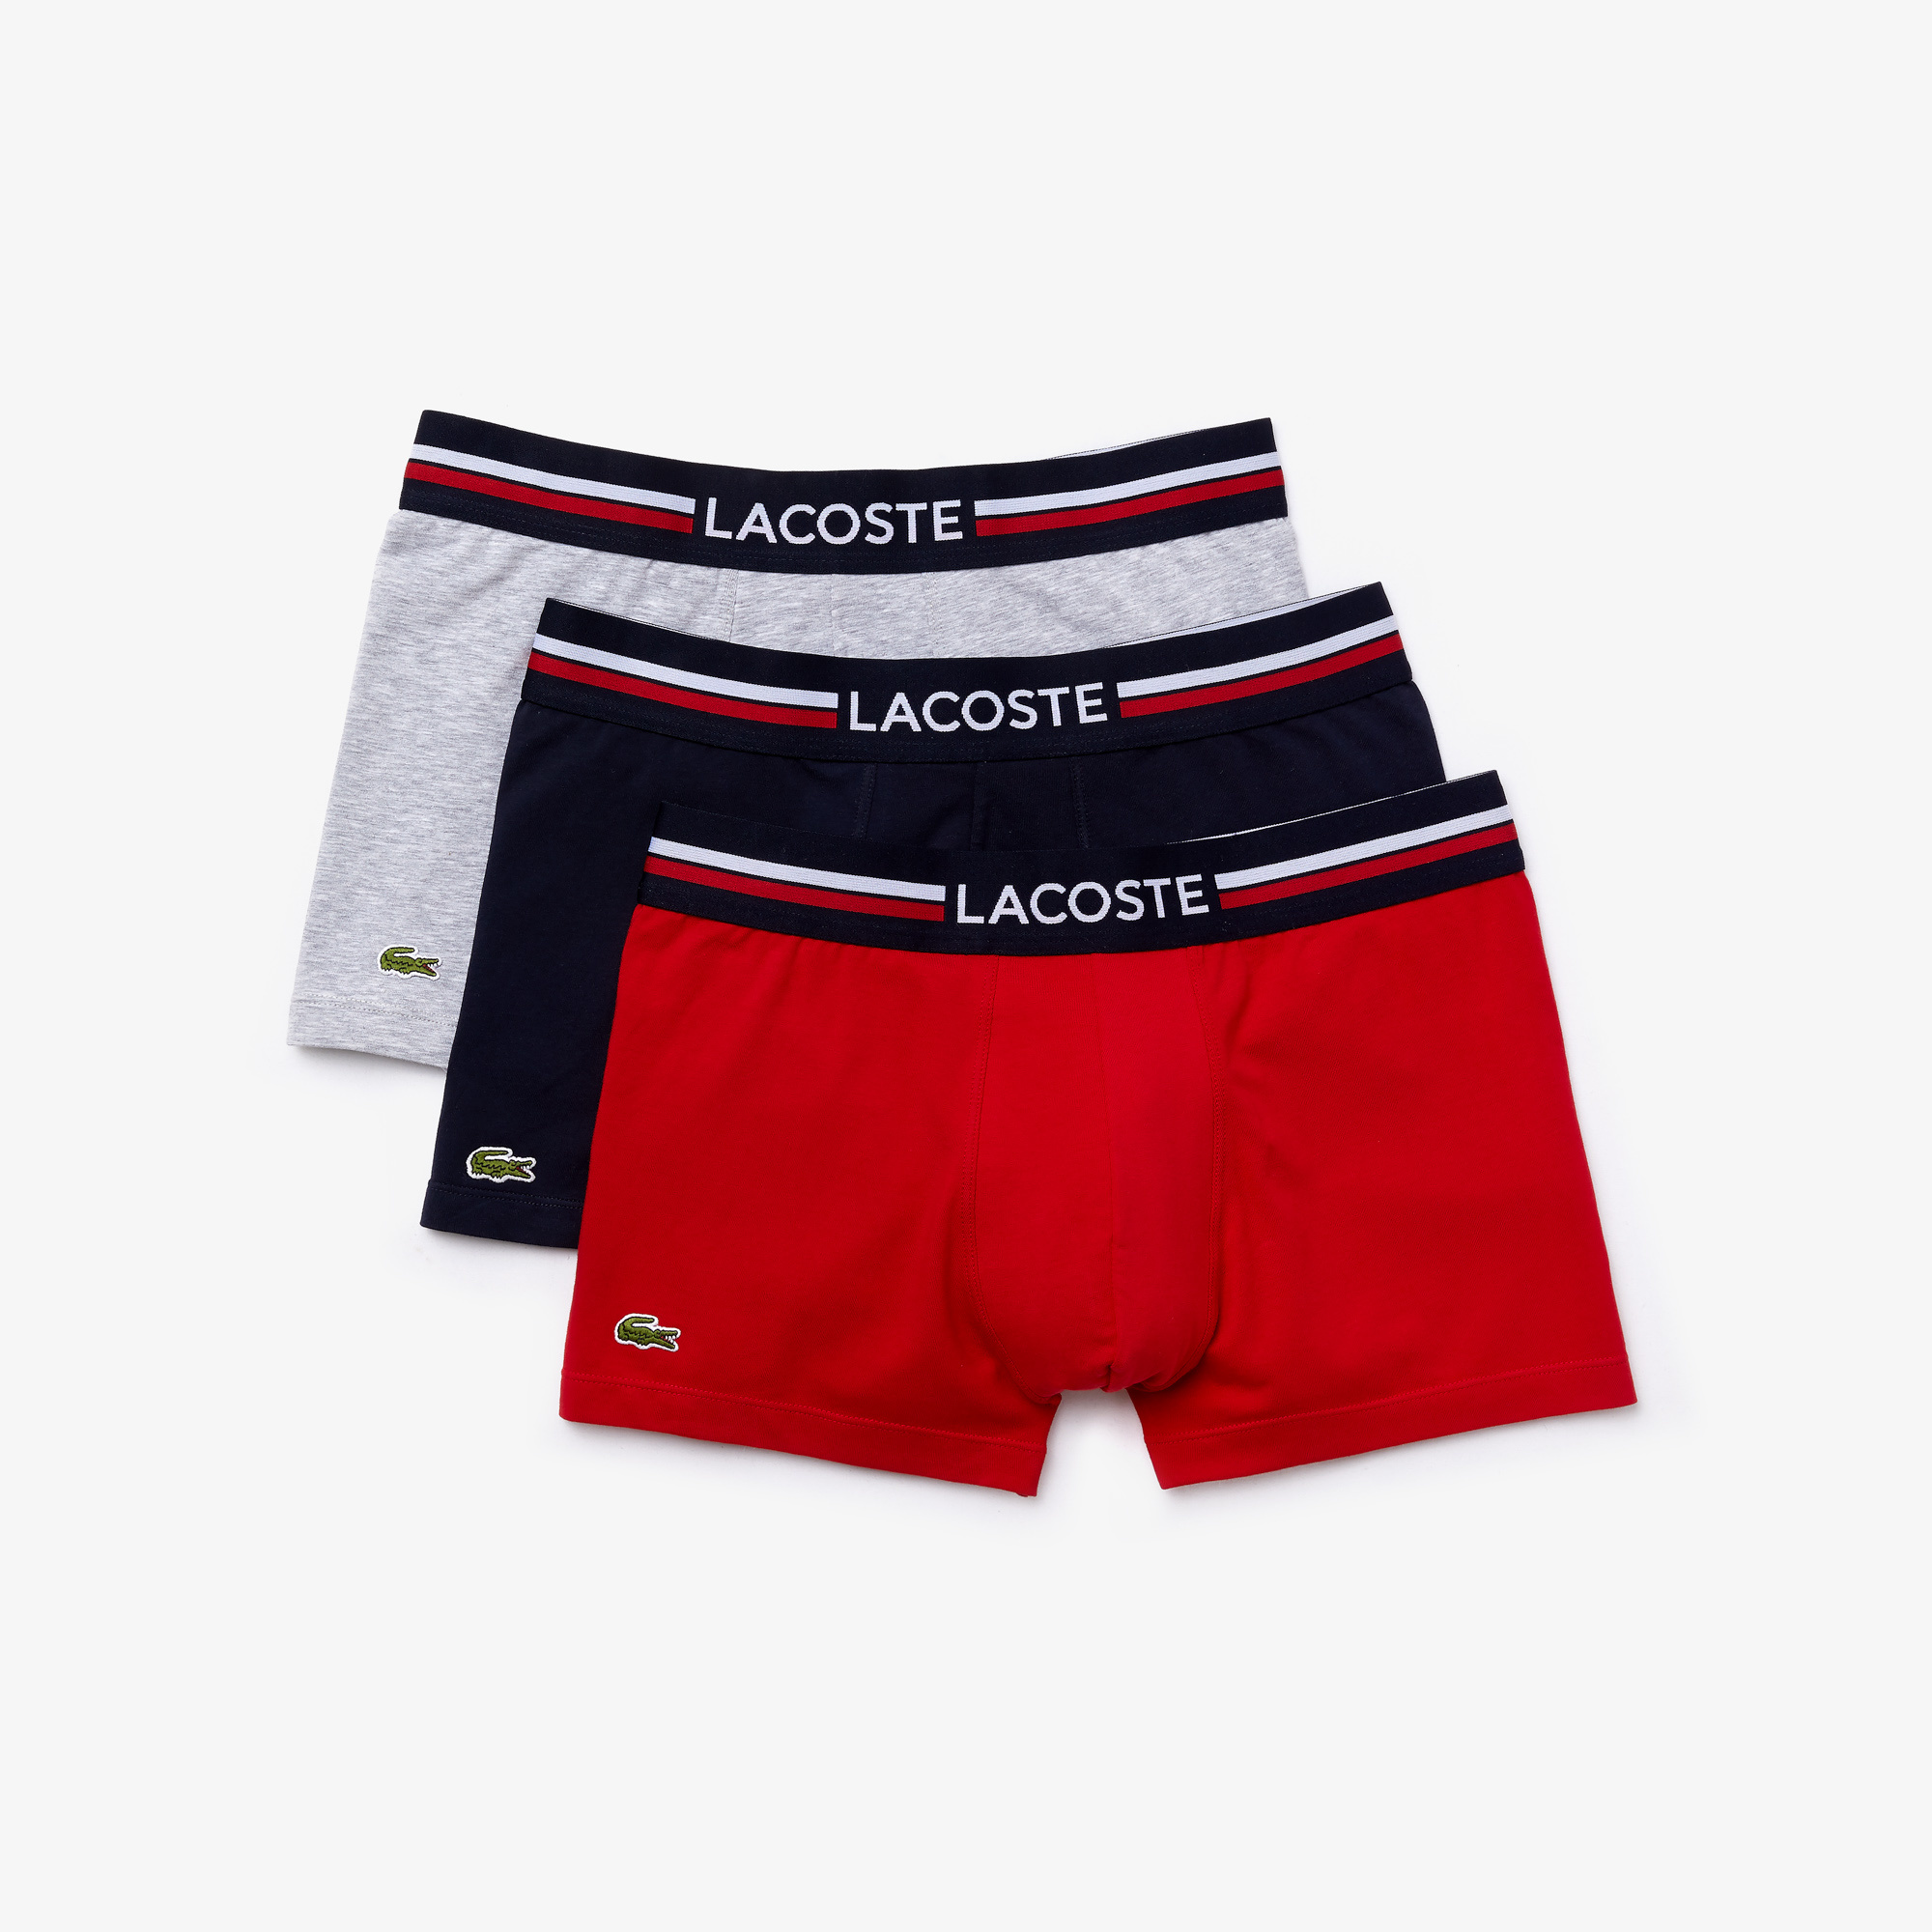 Lacoste Lacoste Iconic Heren Boxershorts 3 Pack